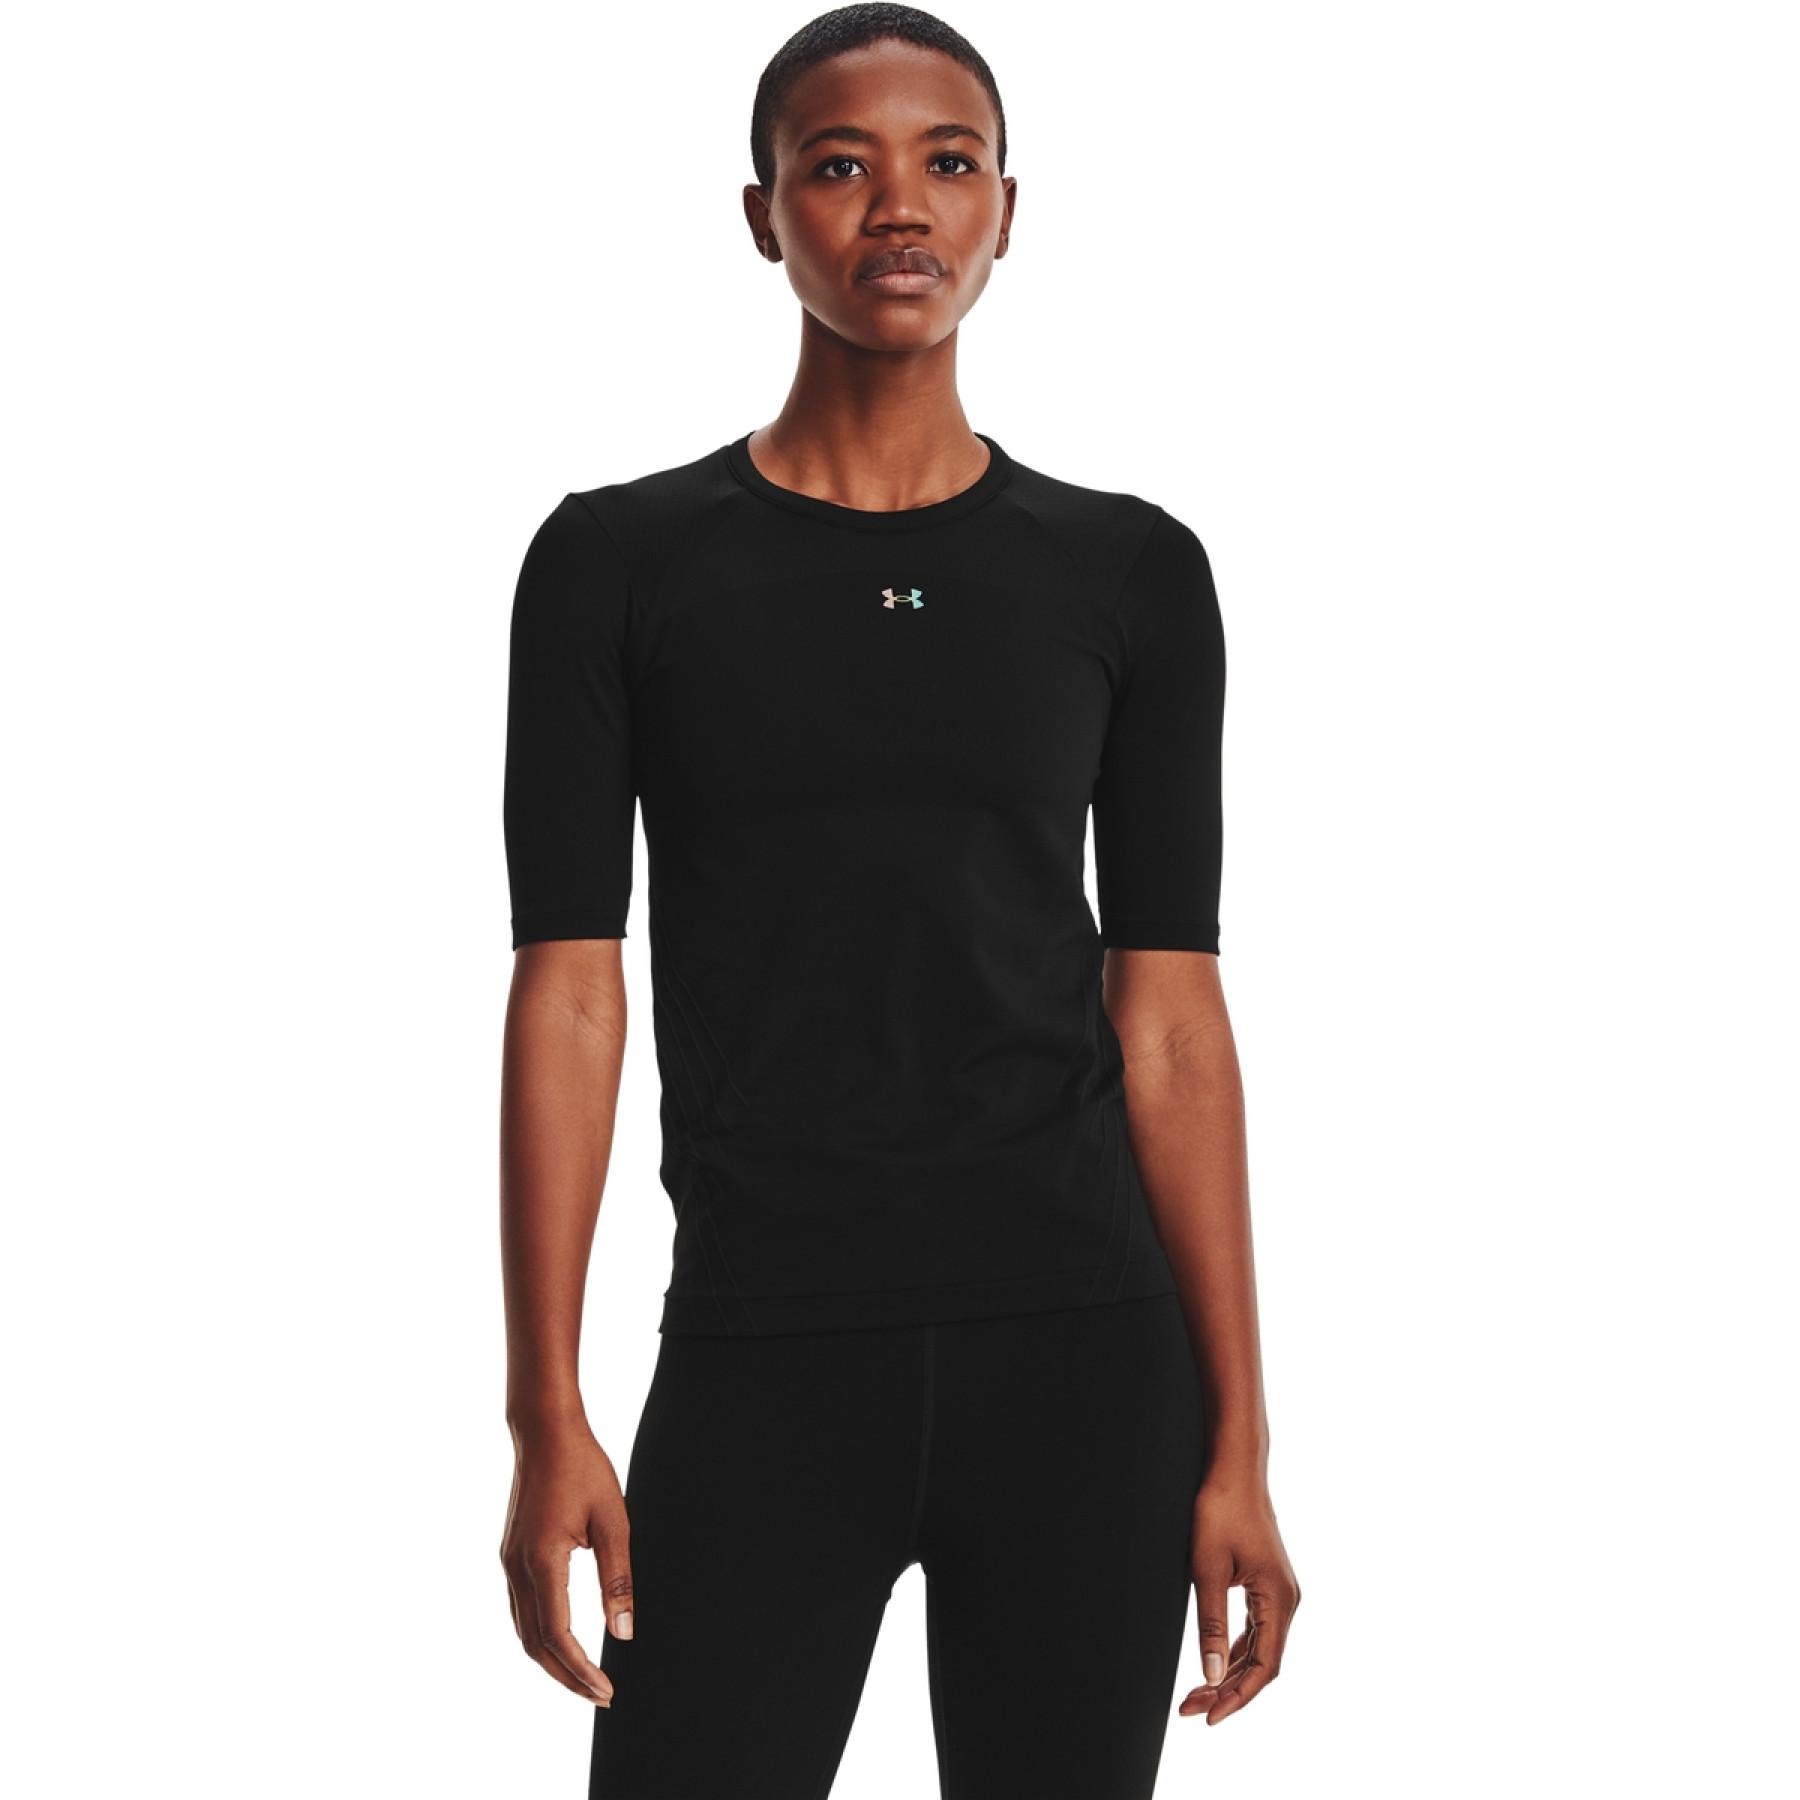 Maillot de mujer Under Armour à manches courtes rush Seamless